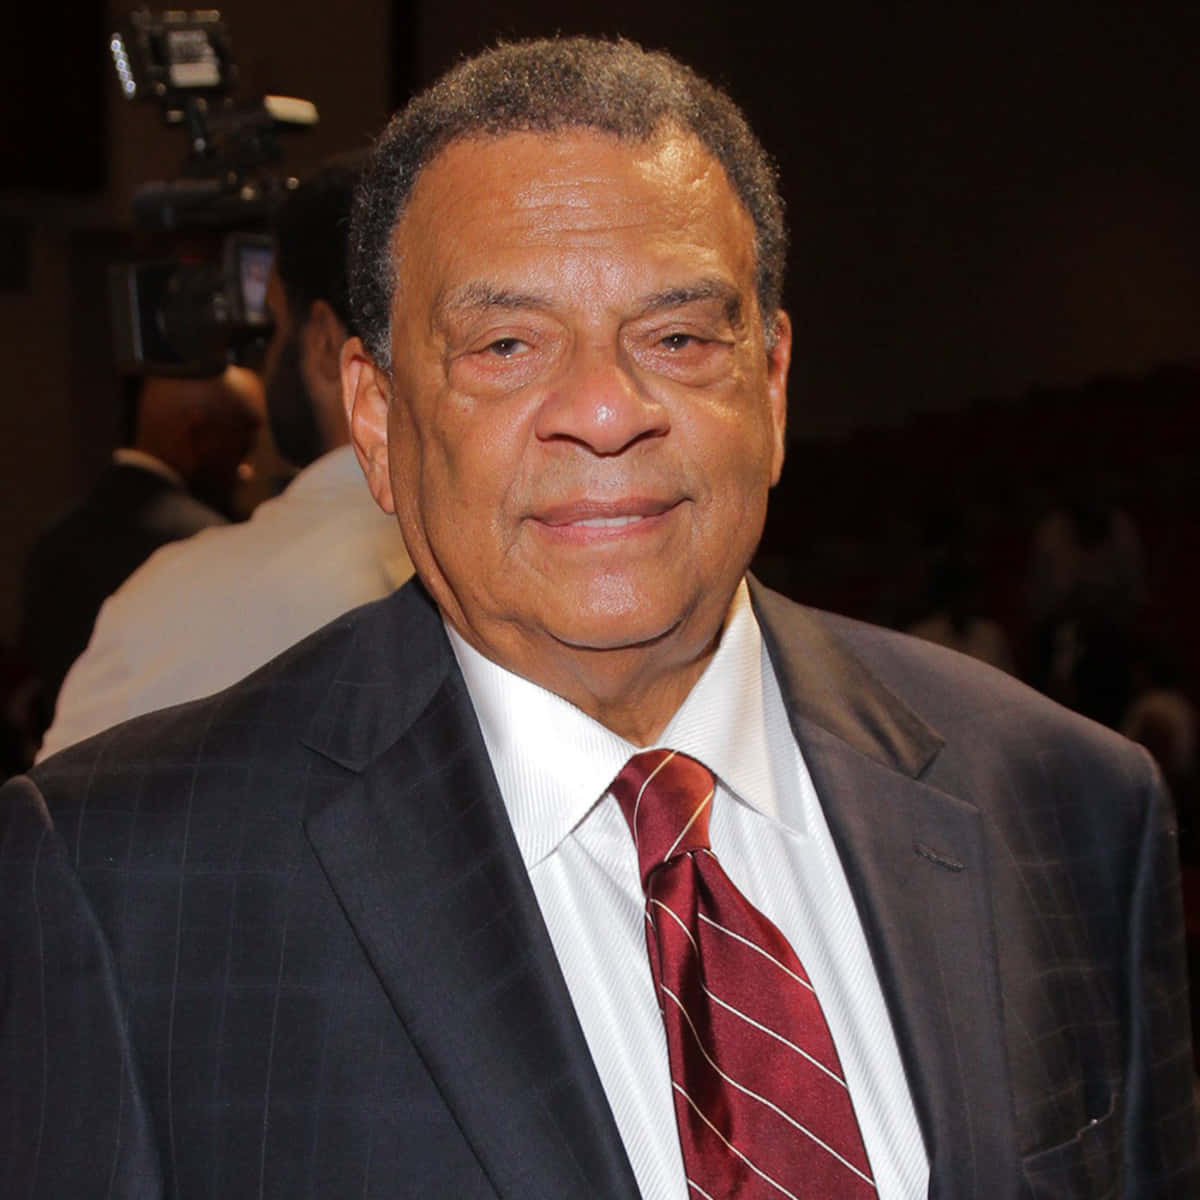 Andrew Young Wearing a Red Striped Tie Wallpaper